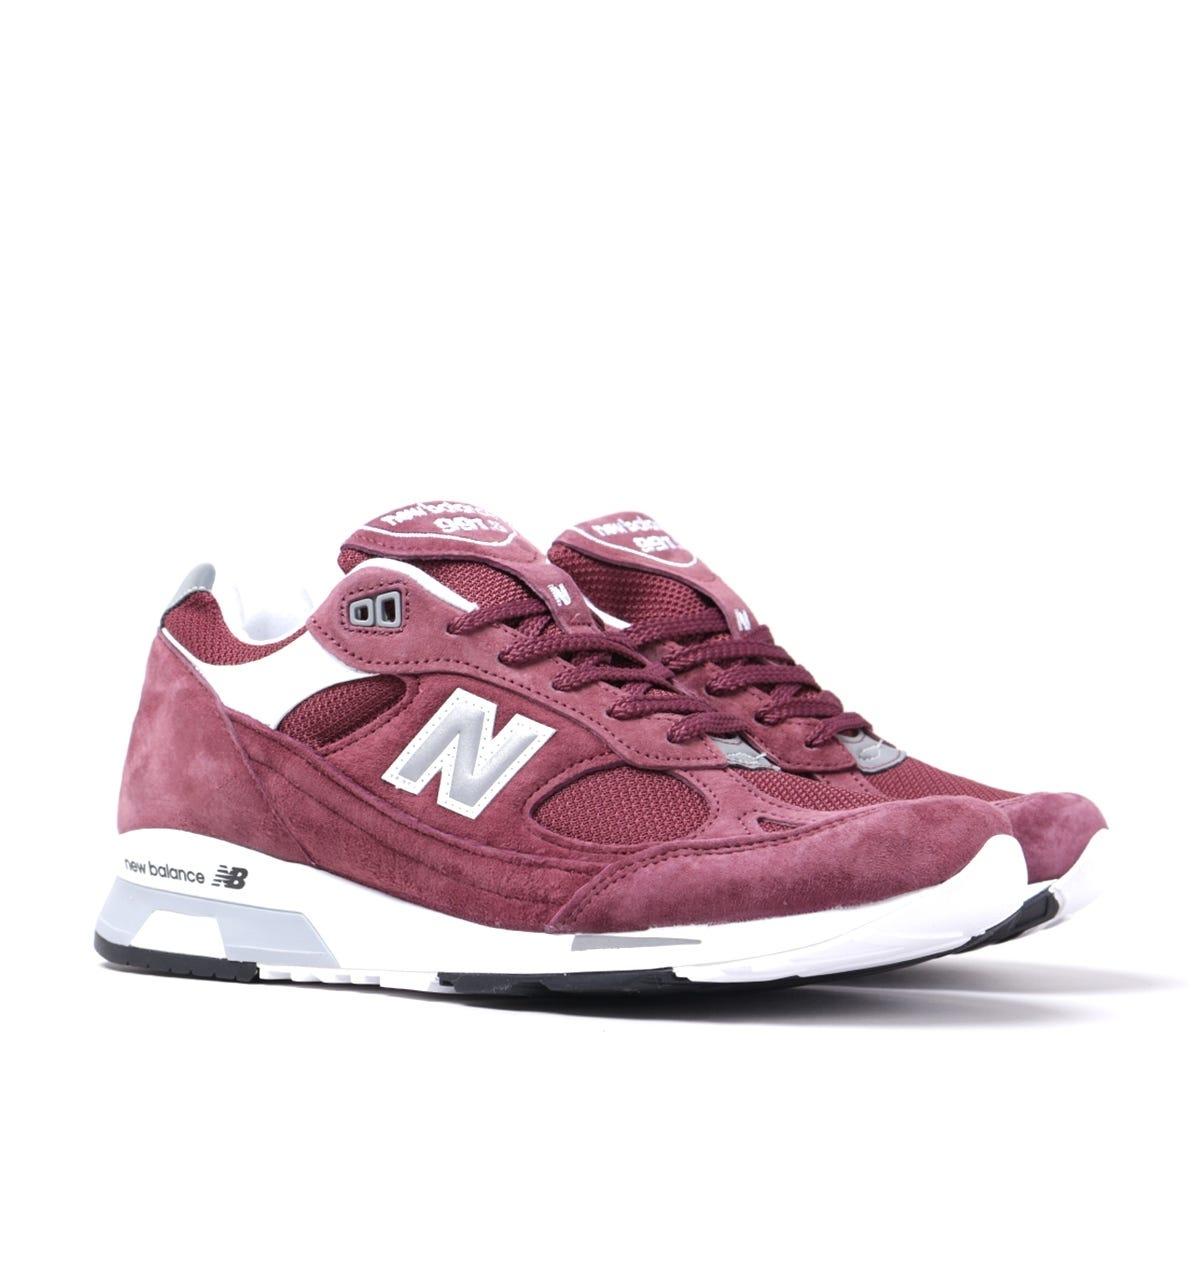 New Balance M991.5 Made In England Bordeaux Suede Trainers in ...